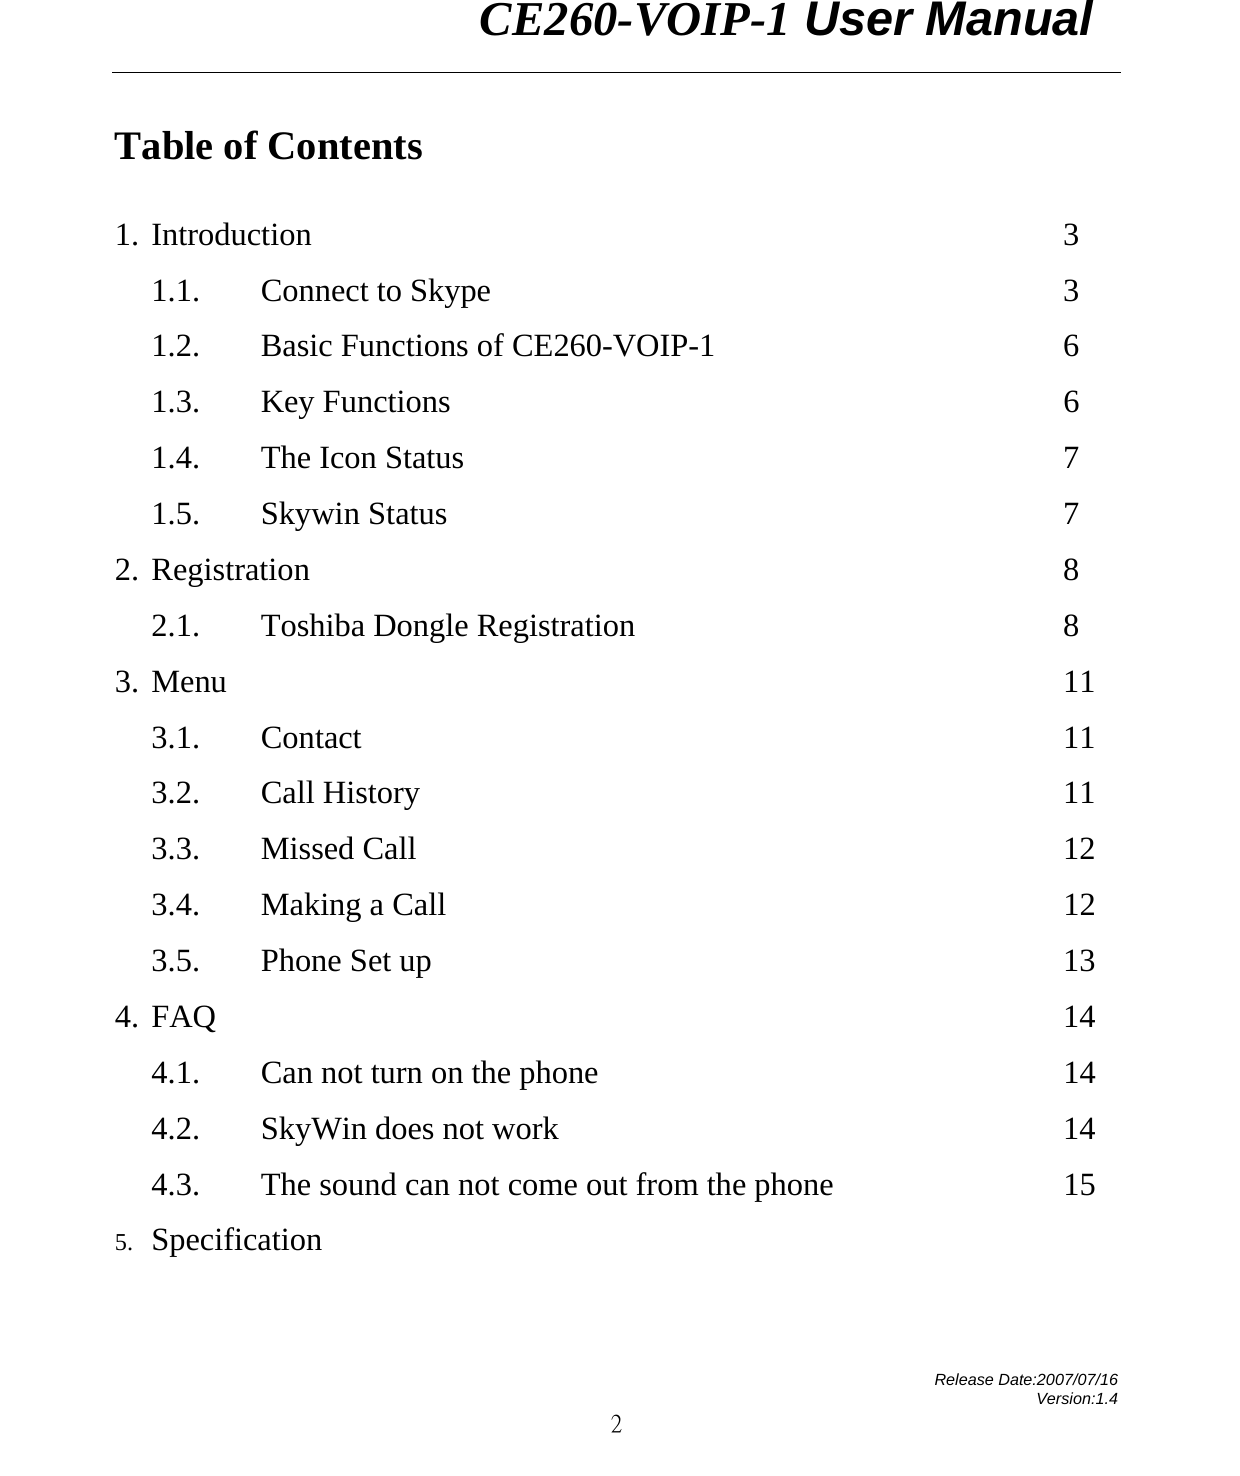                CE260-VOIP-1 User Manual   Release Date:2007/07/16 Version:1.4 2 Table of Contents  1. Introduction           3 1.1. Connect to Skype        3 1.2. Basic Functions of CE260-VOIP-1                6 1.3. Key Functions          6 1.4. The Icon Status         7 1.5. Skywin Status         7 2. Registration           8 2.1. Toshiba Dongle Registration      8 3. Menu            11 3.1. Contact           11 3.2. Call History         11 3.3. Missed Call         12 3.4. Making a Call         12 3.5. Phone Set up         13 4. FAQ            14 4.1. Can not turn on the phone              14 4.2. SkyWin does not work       14 4.3. The sound can not come out from the phone       15 5. Specification         